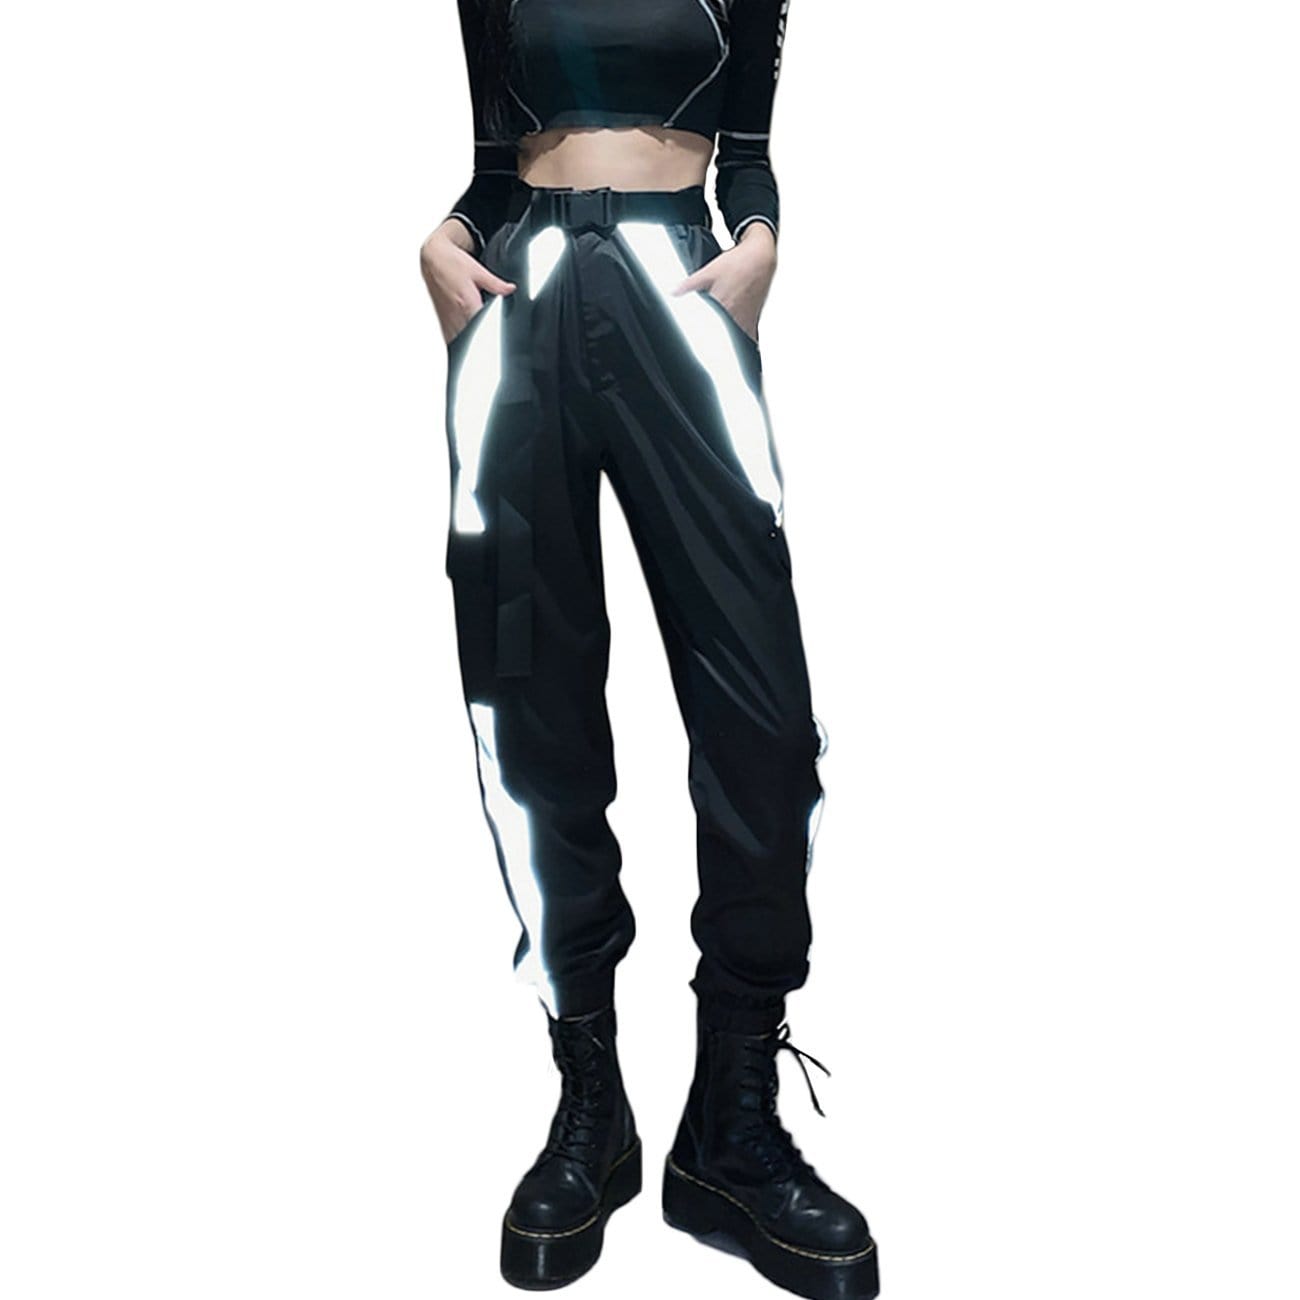 TO Reflective Strip Cargo Pants